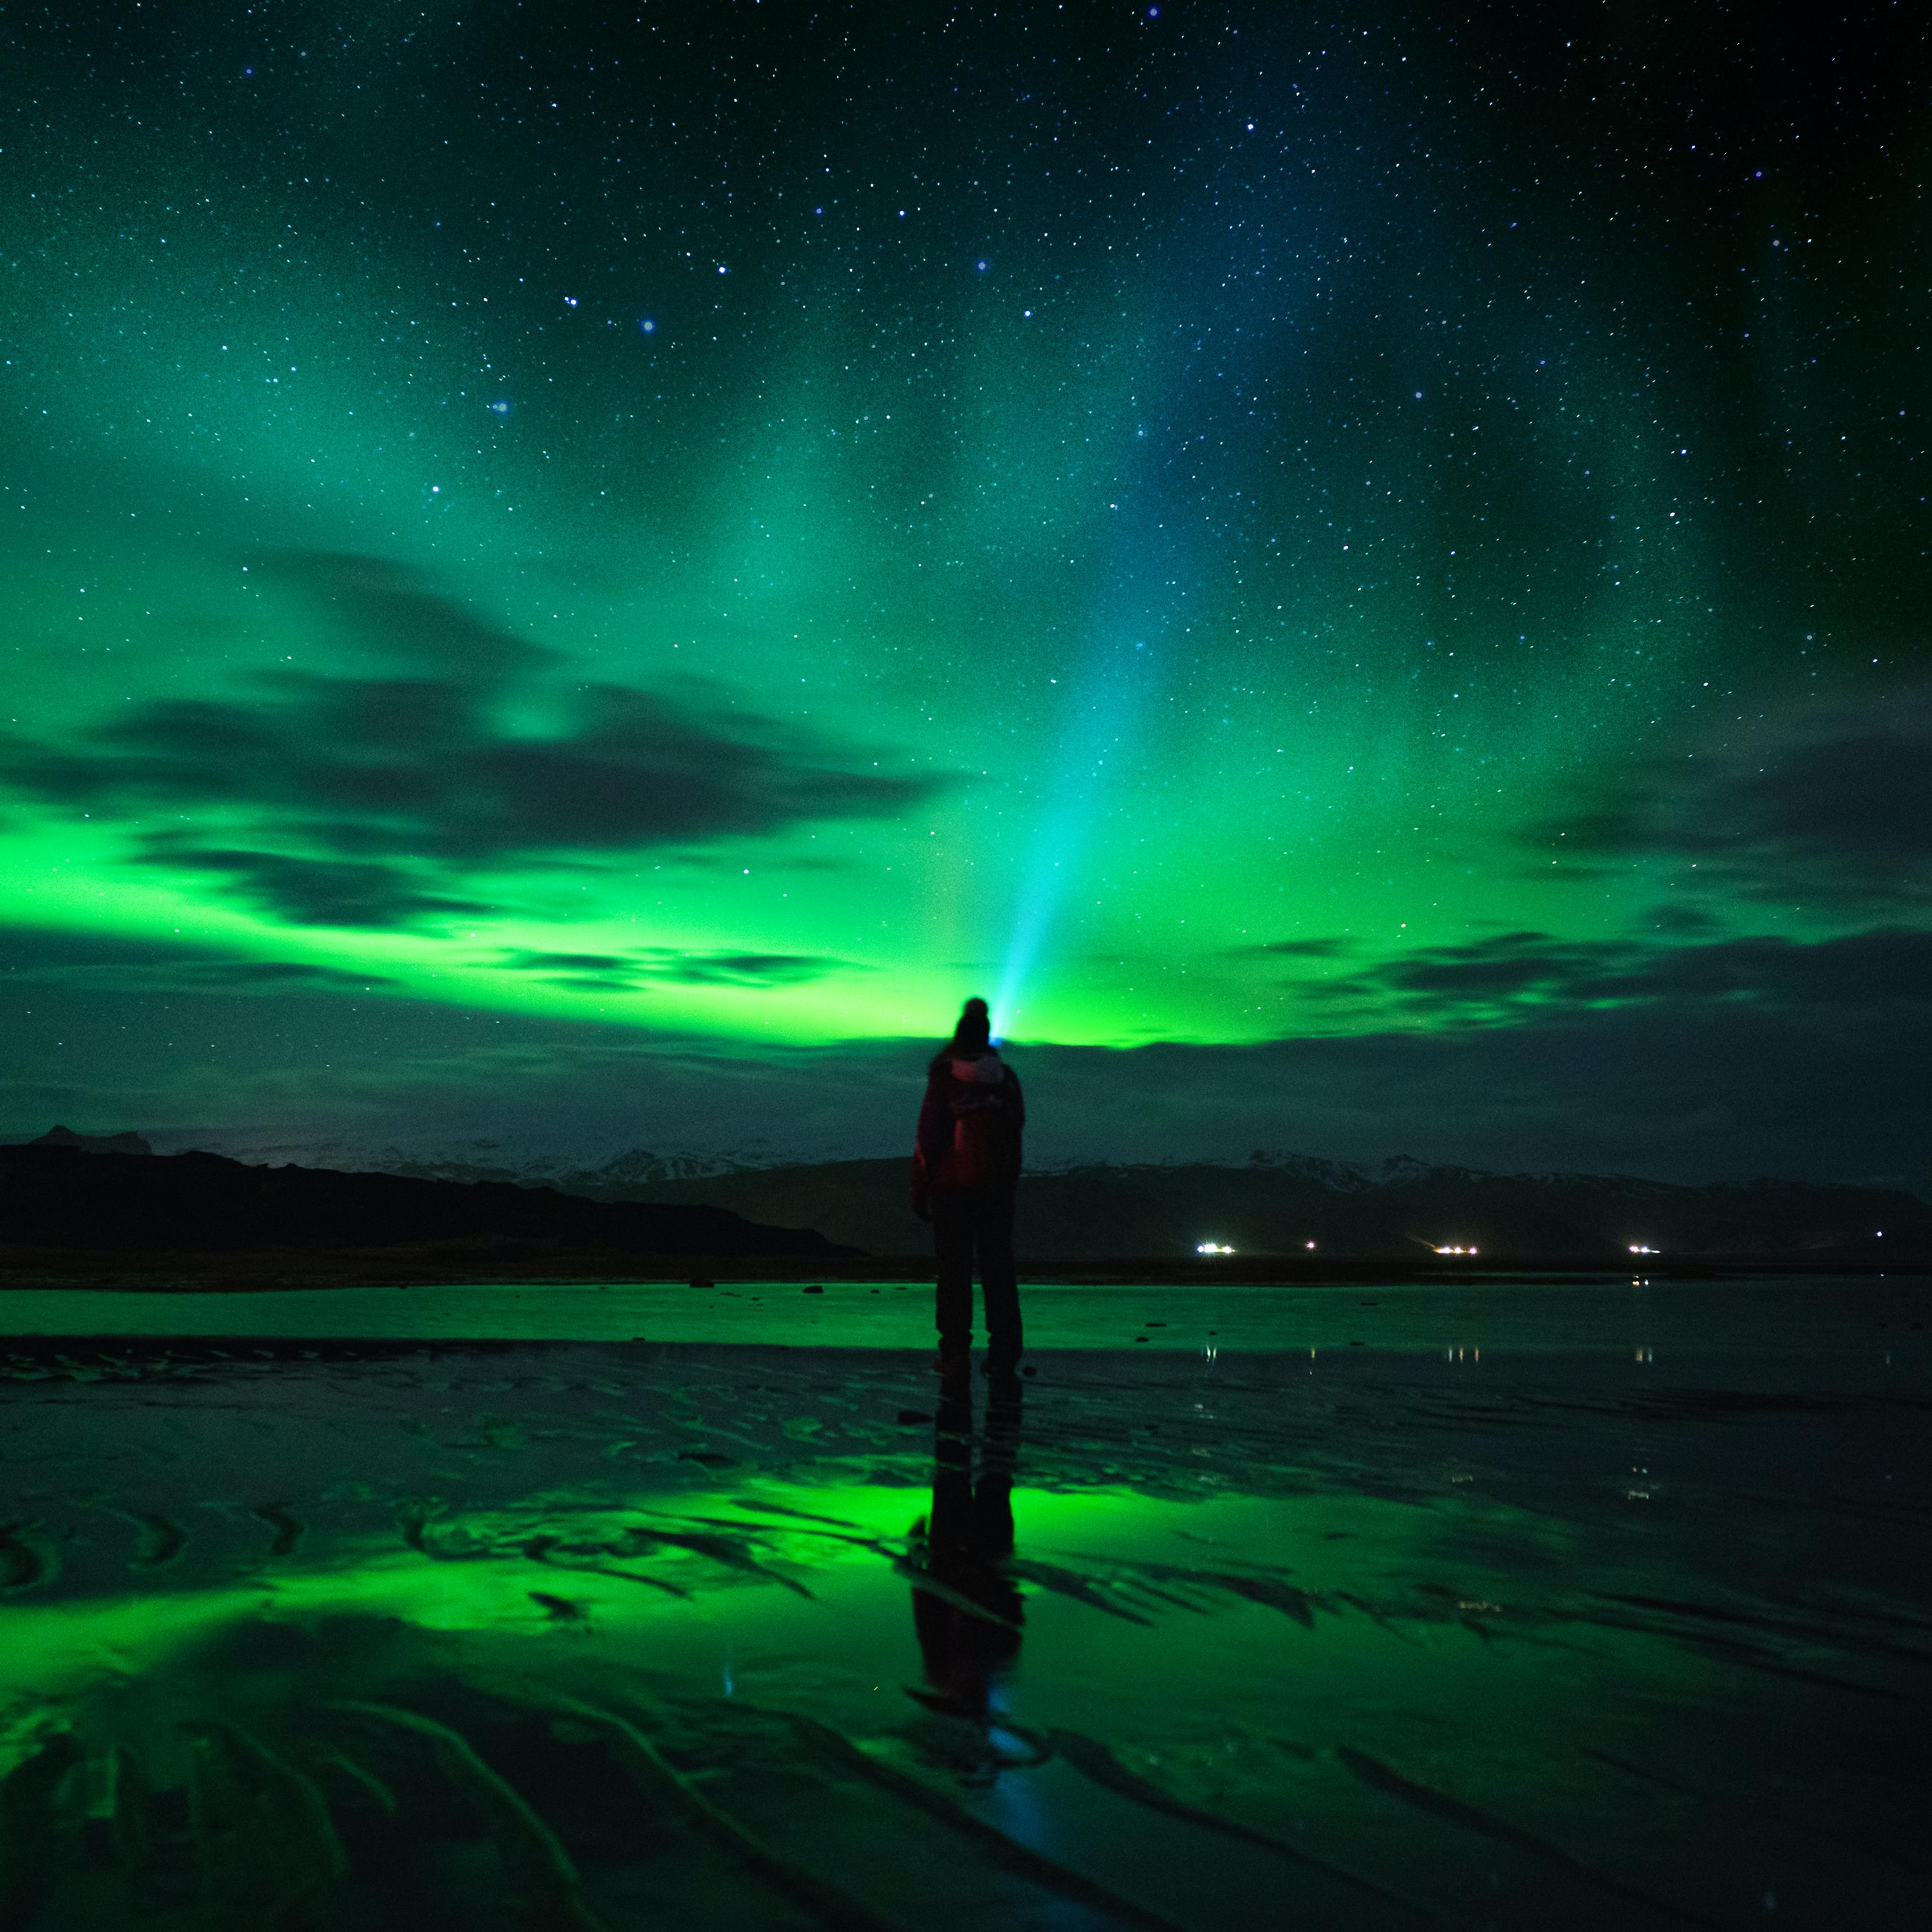 A lone figure stands on a wet beach, backlit by the ethereal glow of the Northern Lights and a starry sky.